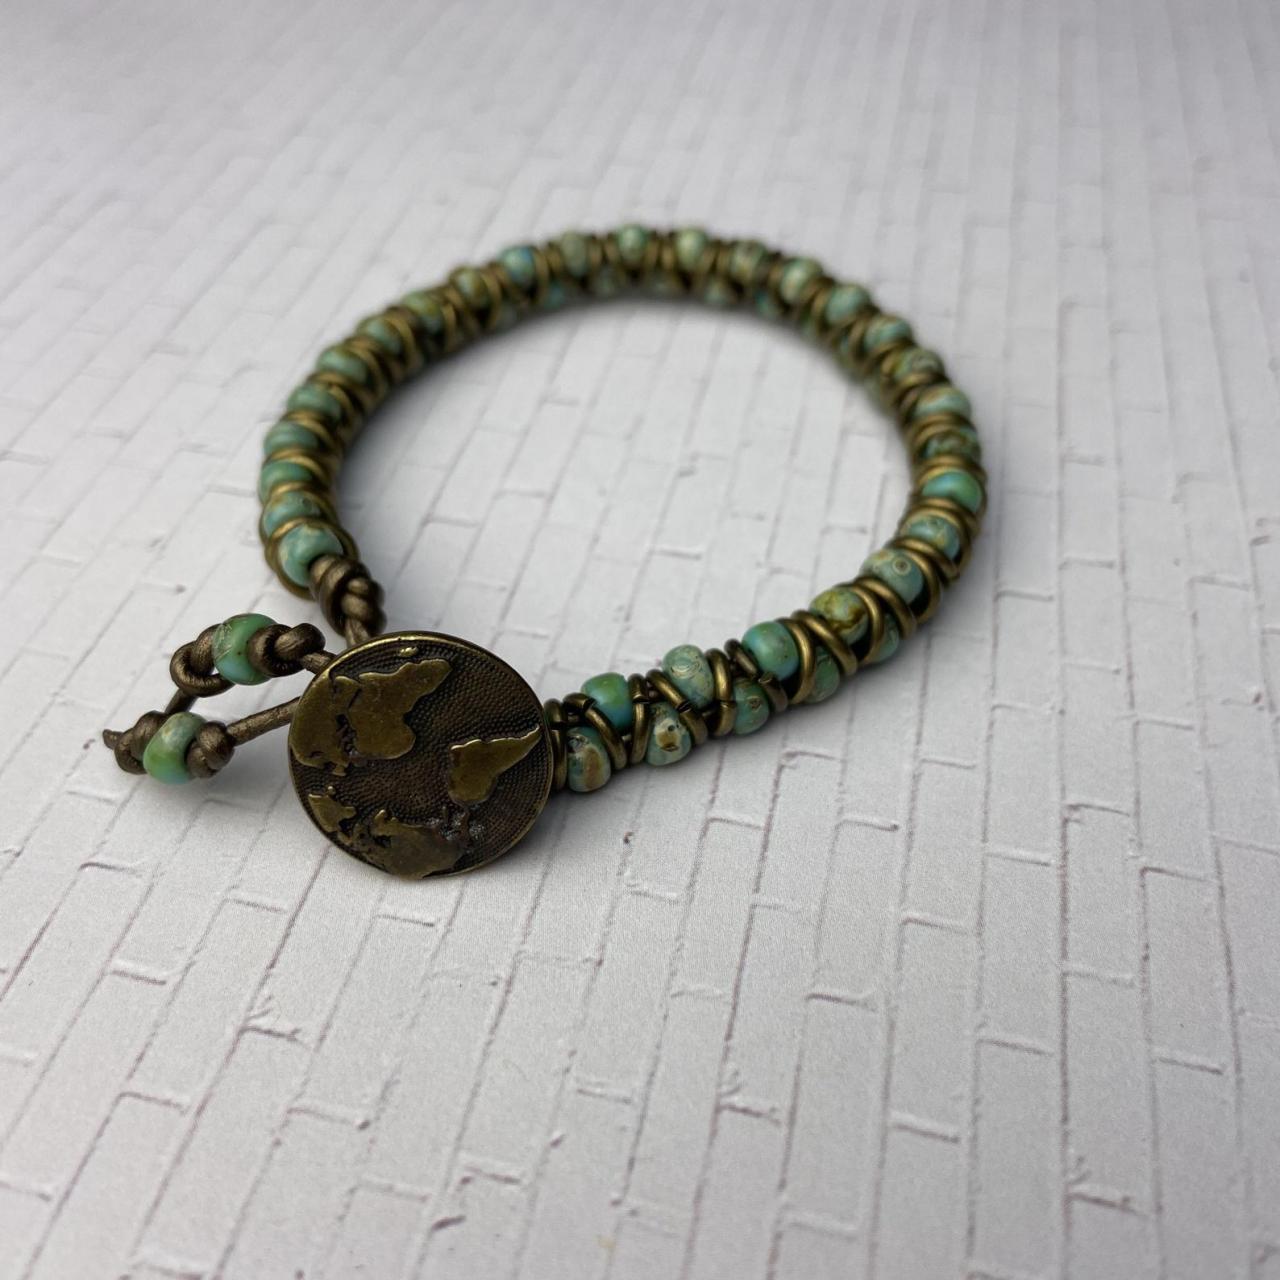 Earth Button Zig Zag Bracelet Antique Gold Seafoam Picasso Japanese Glass Seed Bead Bronze Leather Finished Bracelet